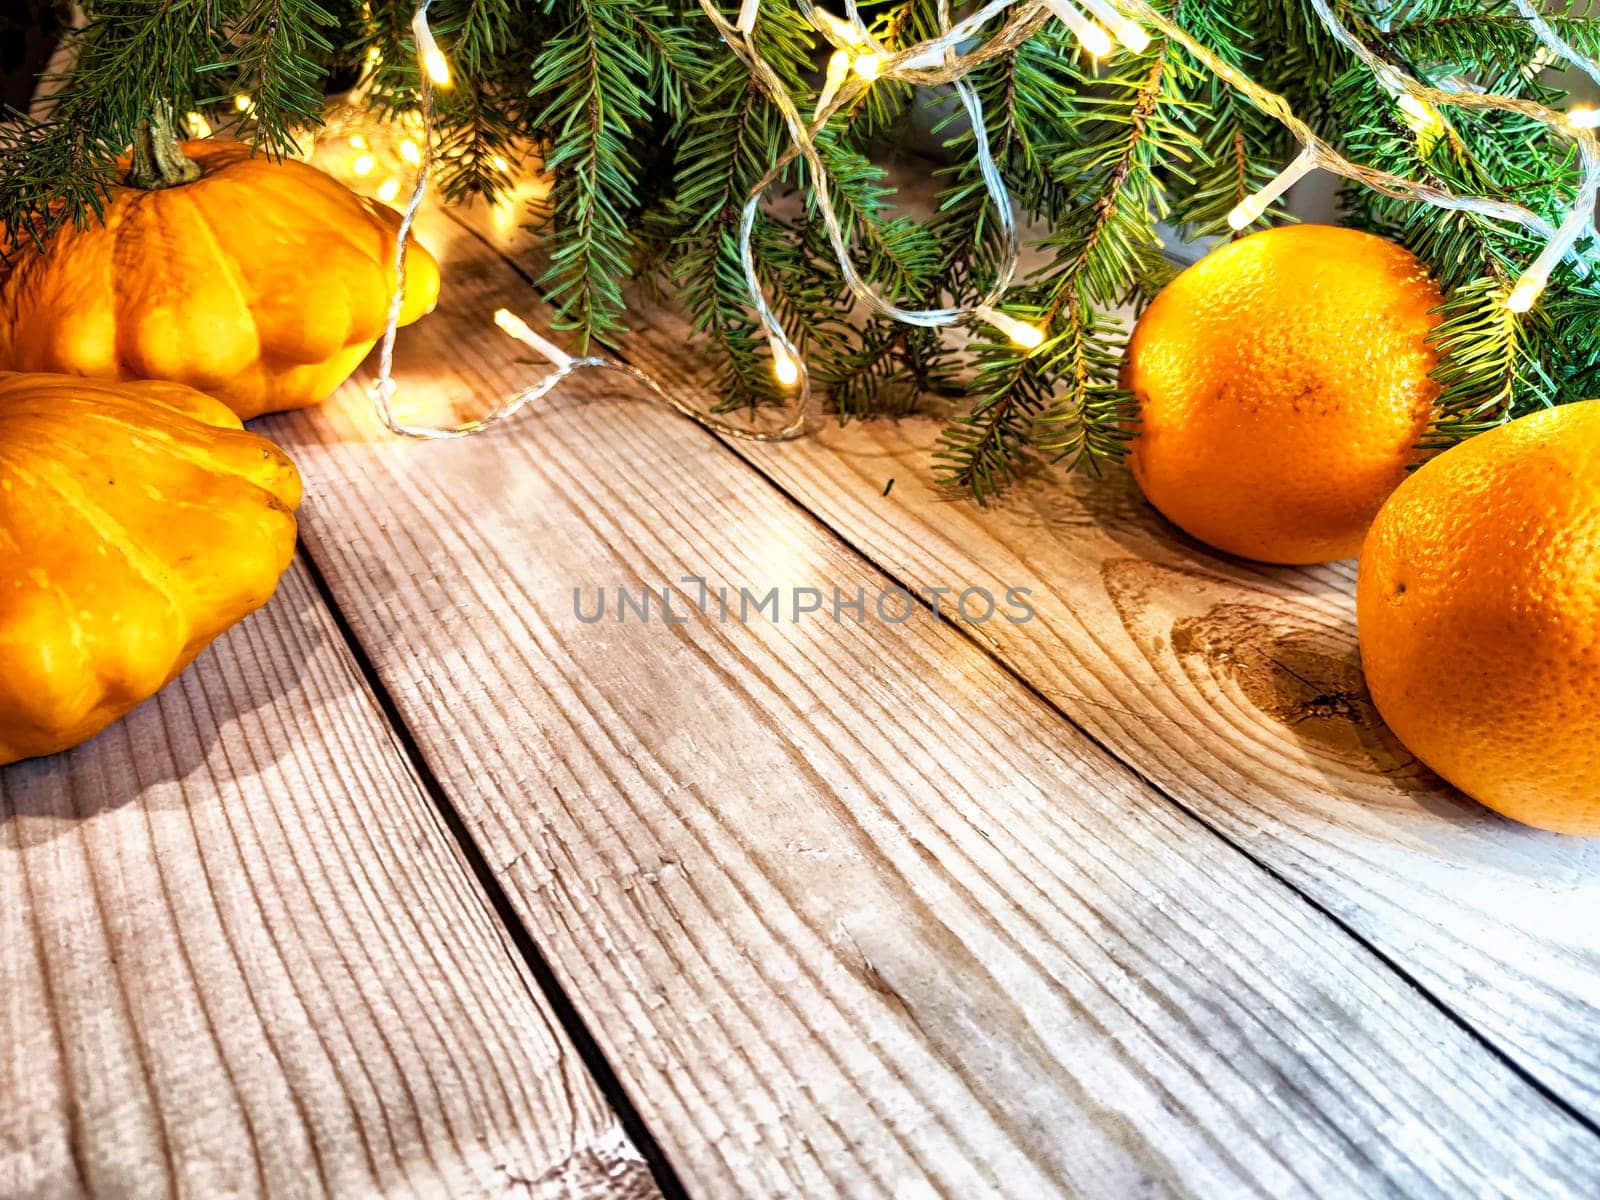 Festive decoration with bouquet and branches of spruce, bright glowing garlands, oranges on wooden background. Decor for Christmas and New Year. Abstract texture, frame, place for text and copy space